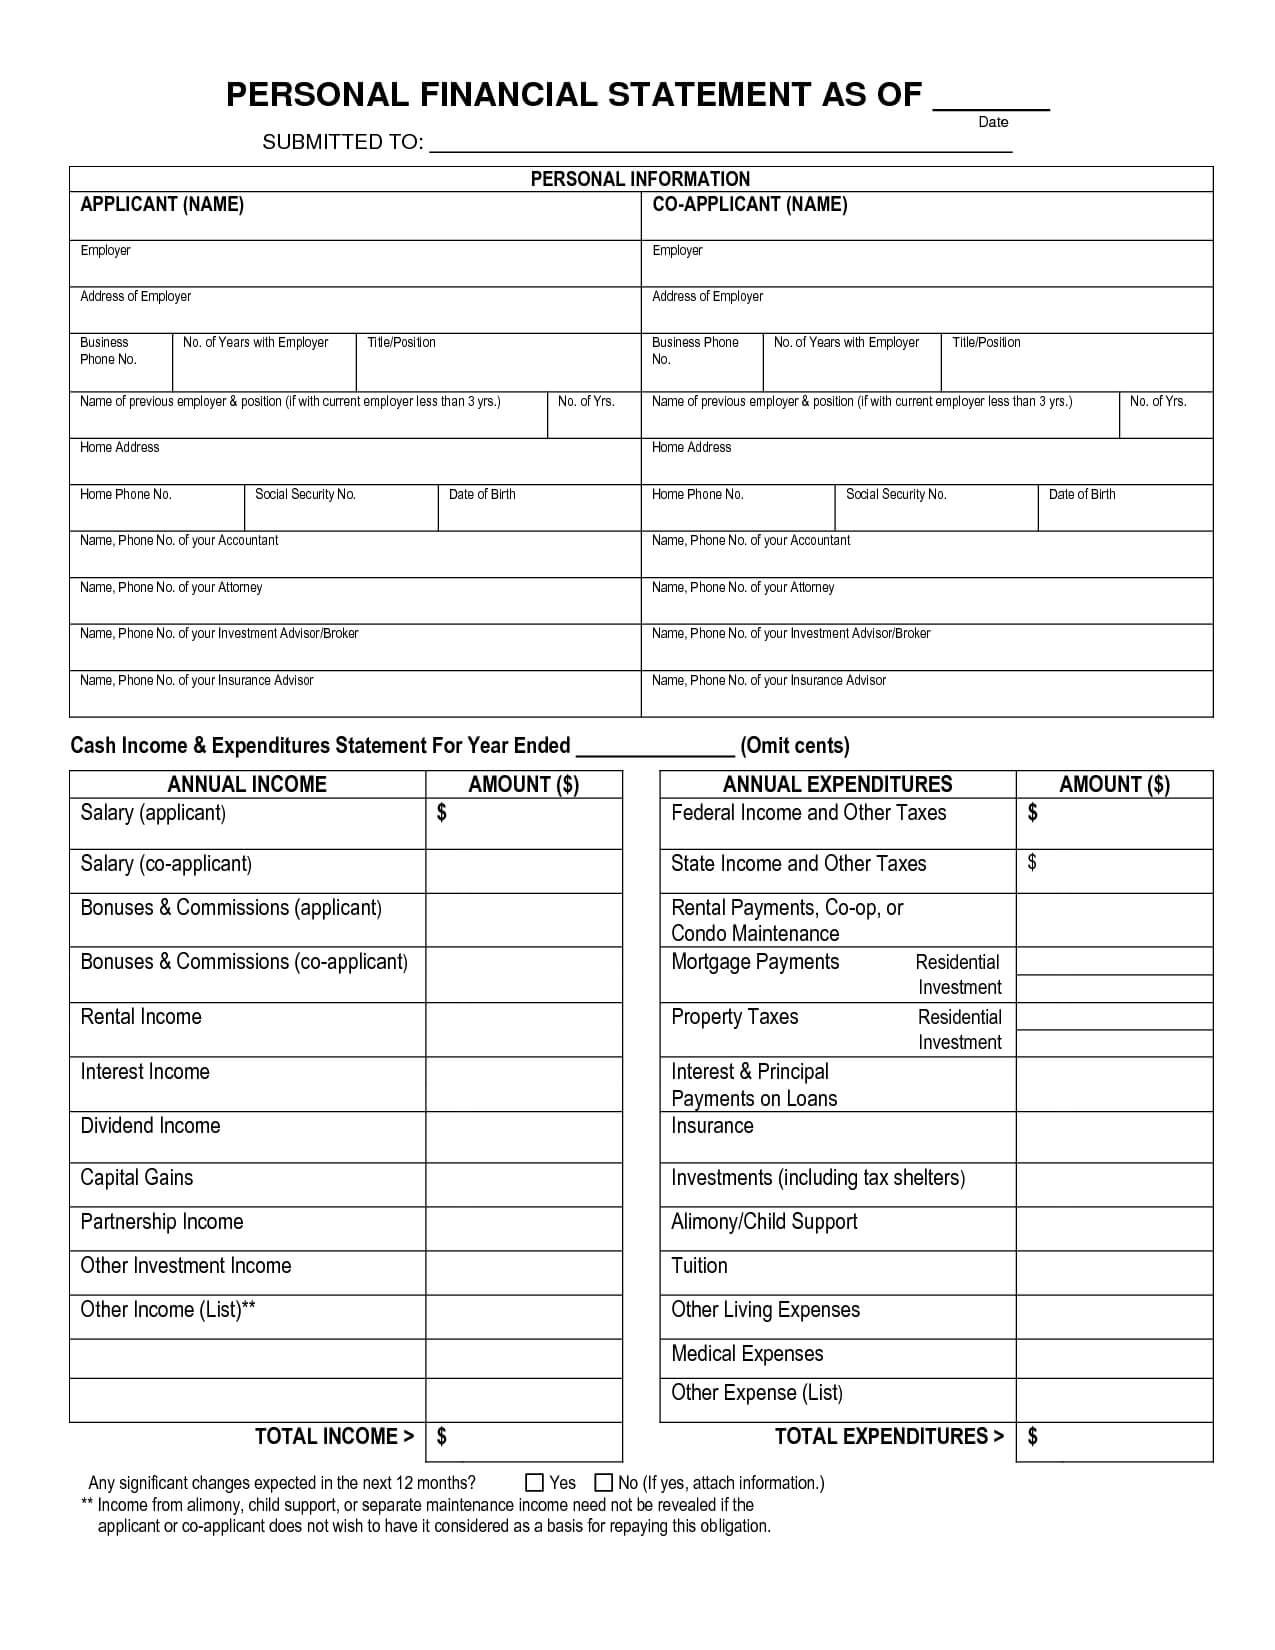 Free Printable Personal Financial Statement | Blank Personal Inside Blank Personal Financial Statement Template